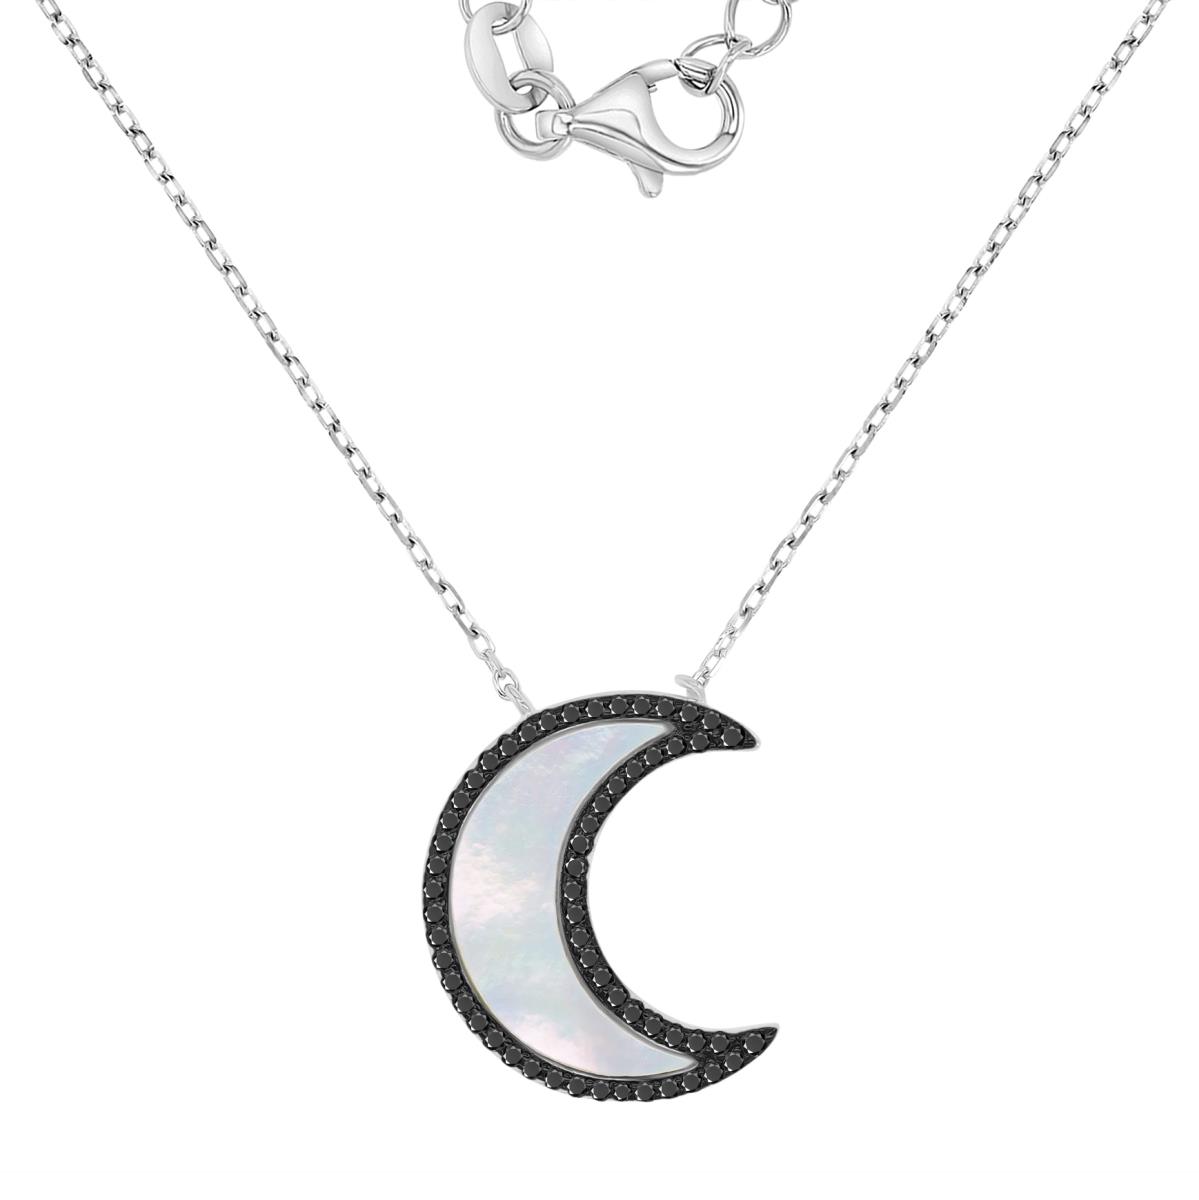 Sterling Silver Rhodium 16.5X20MM Black Spinel & MOP Moon Crescent 18+2" Necklace